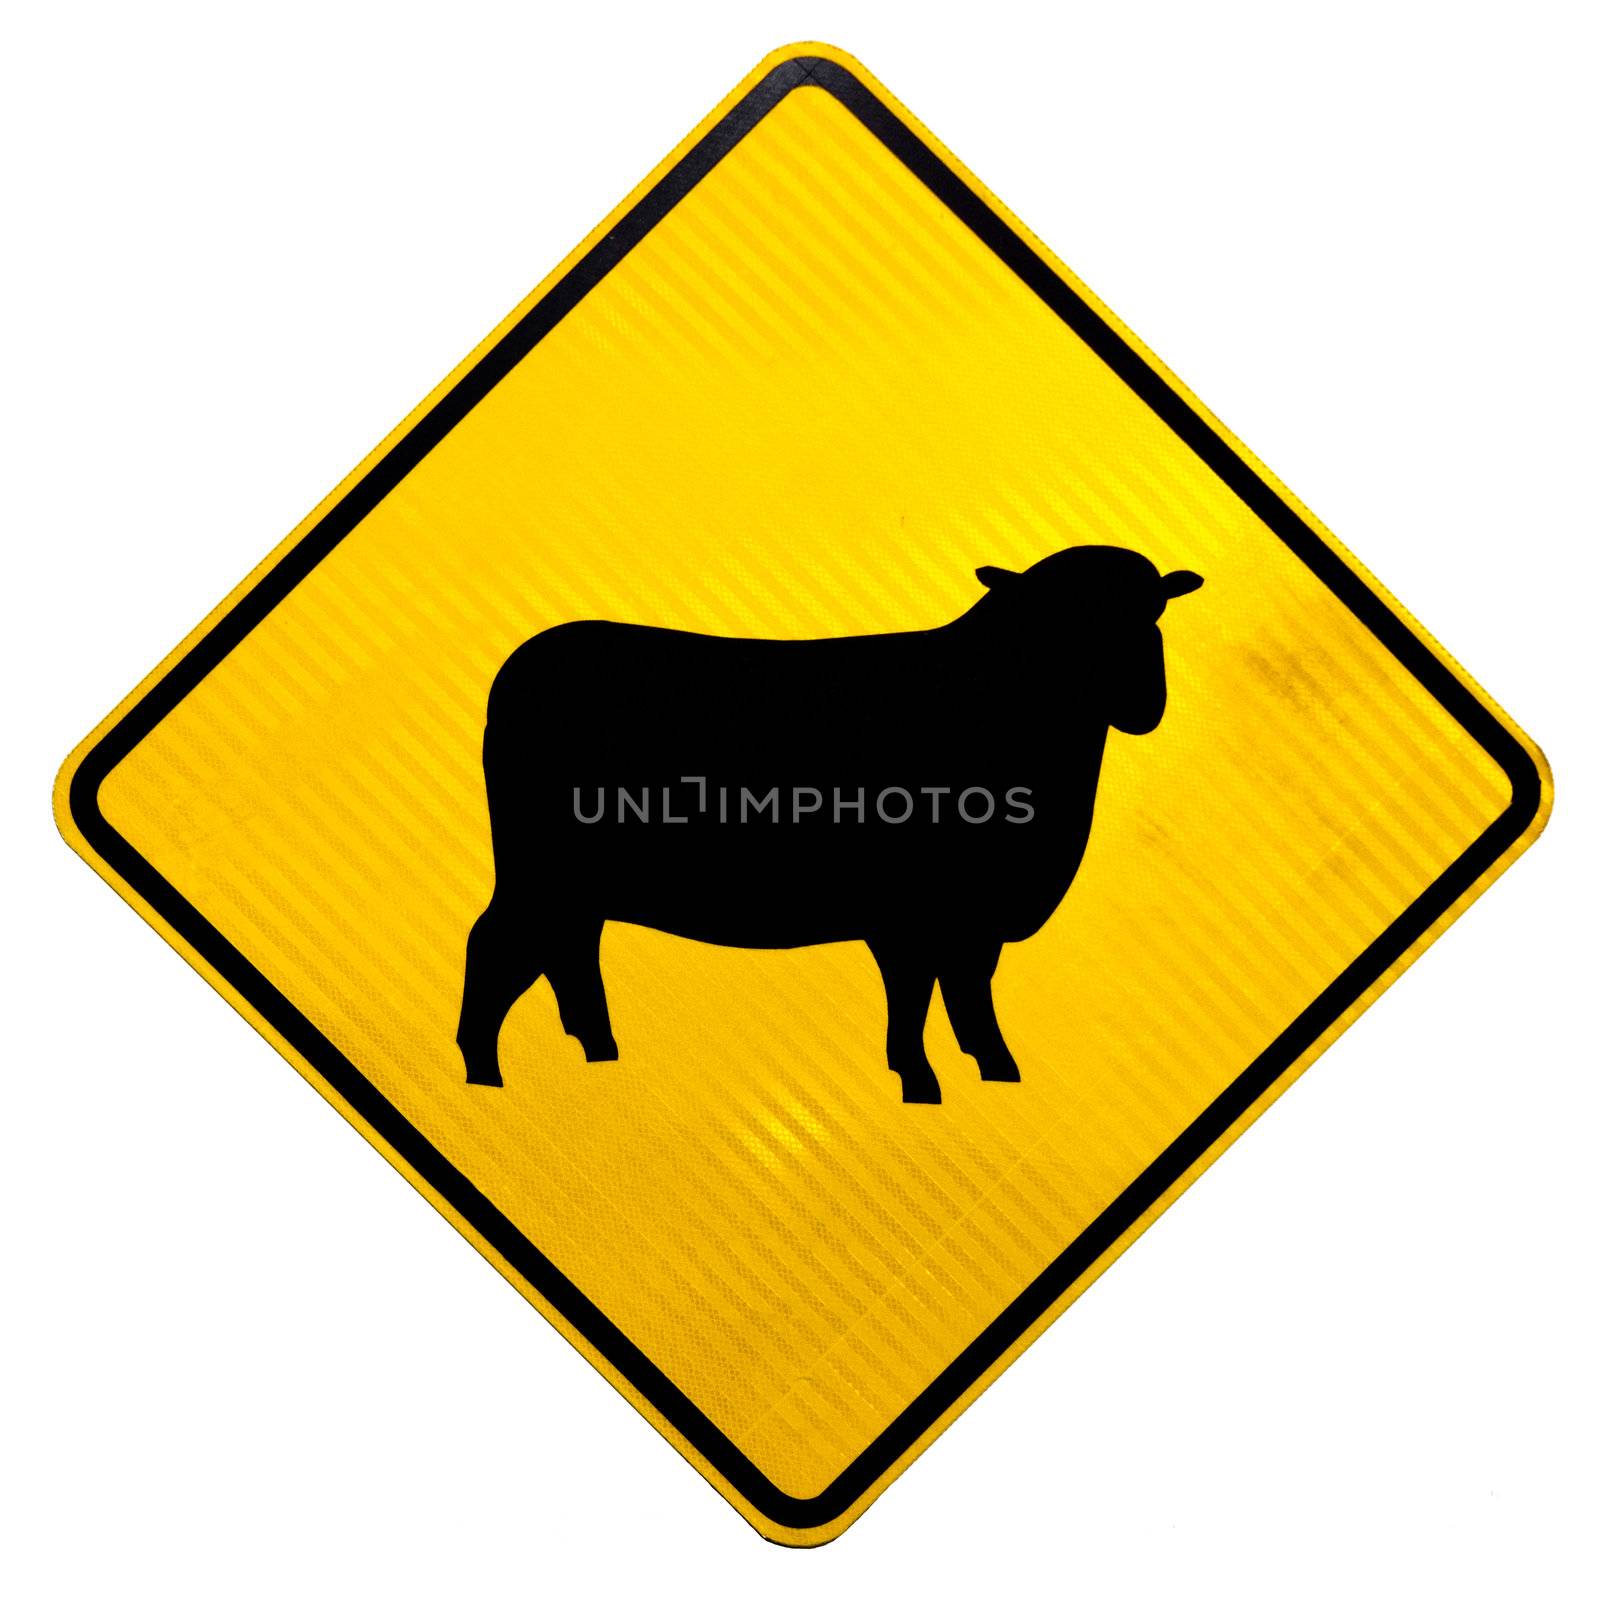 Attention Sheep Crossing Road Sign by PiLens